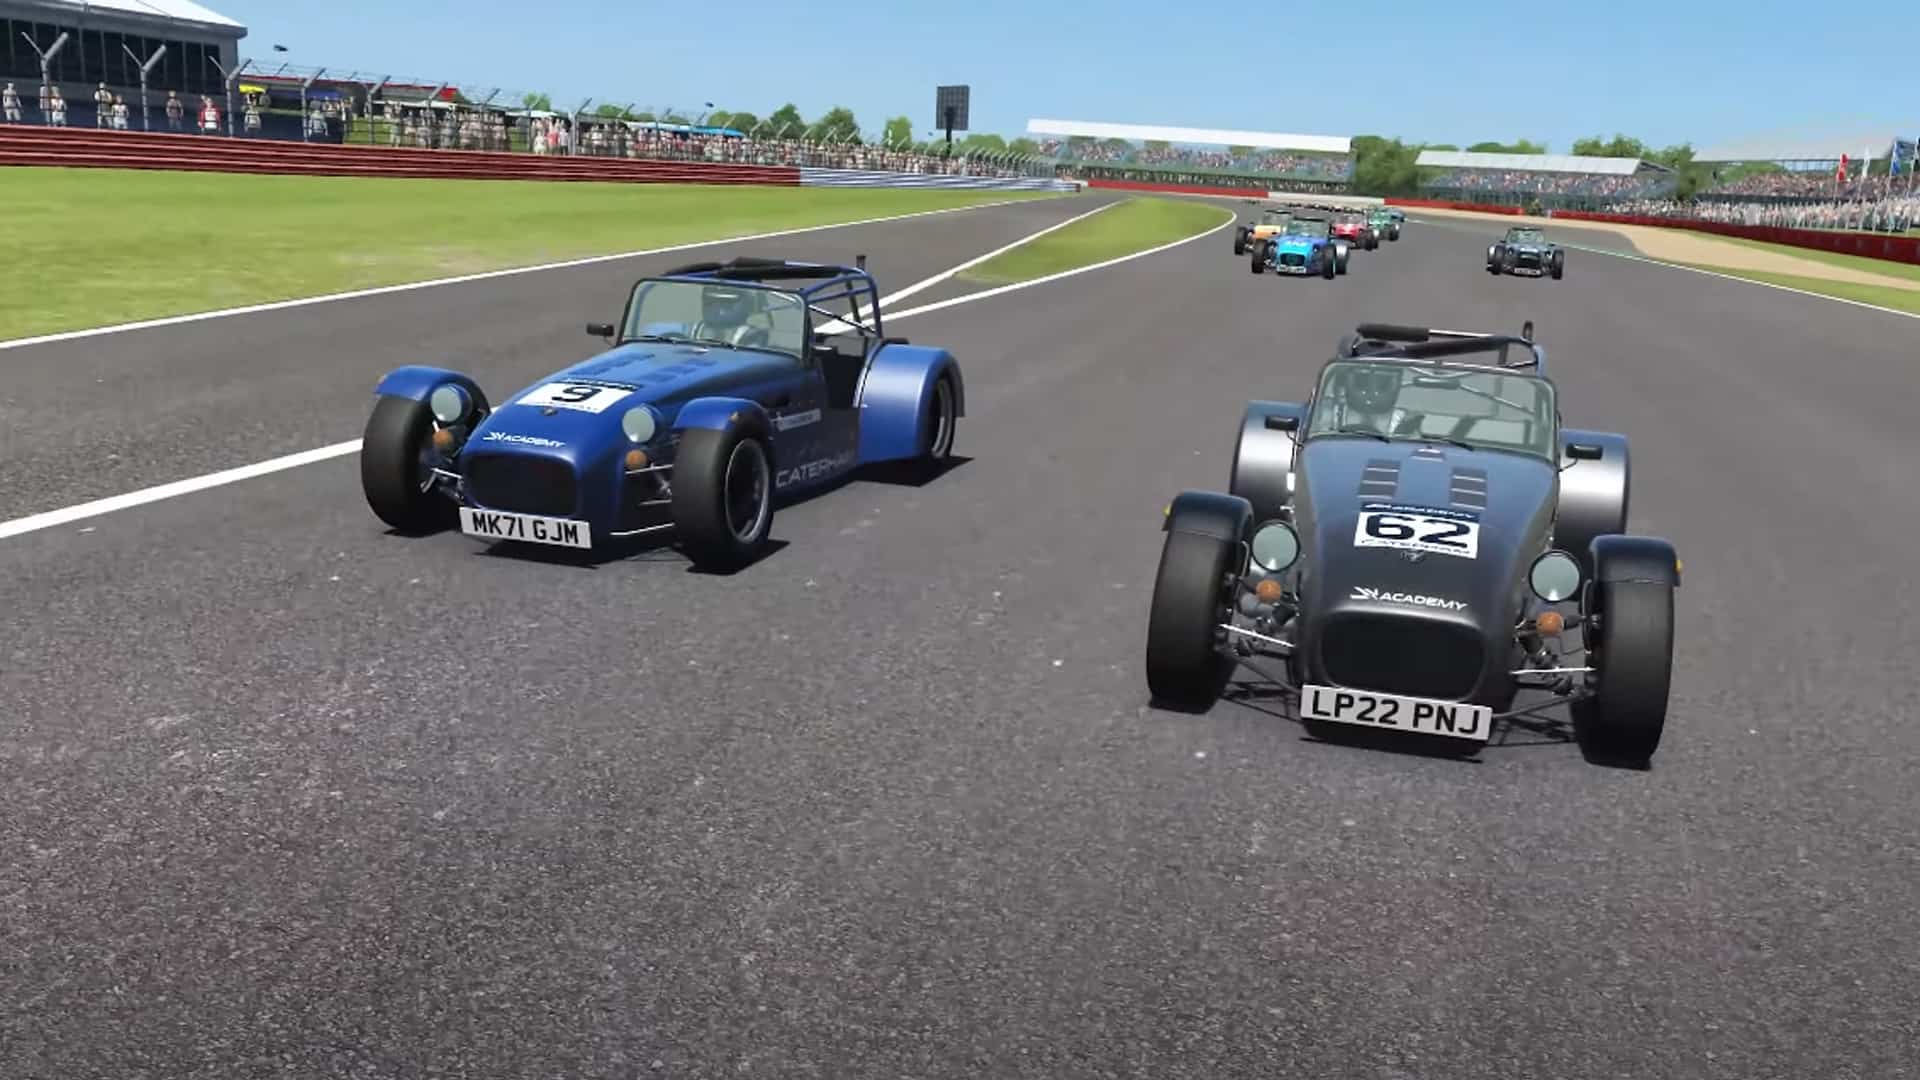 Caterham Academy racer slipstreaming its way to rFactor 2 this month for free